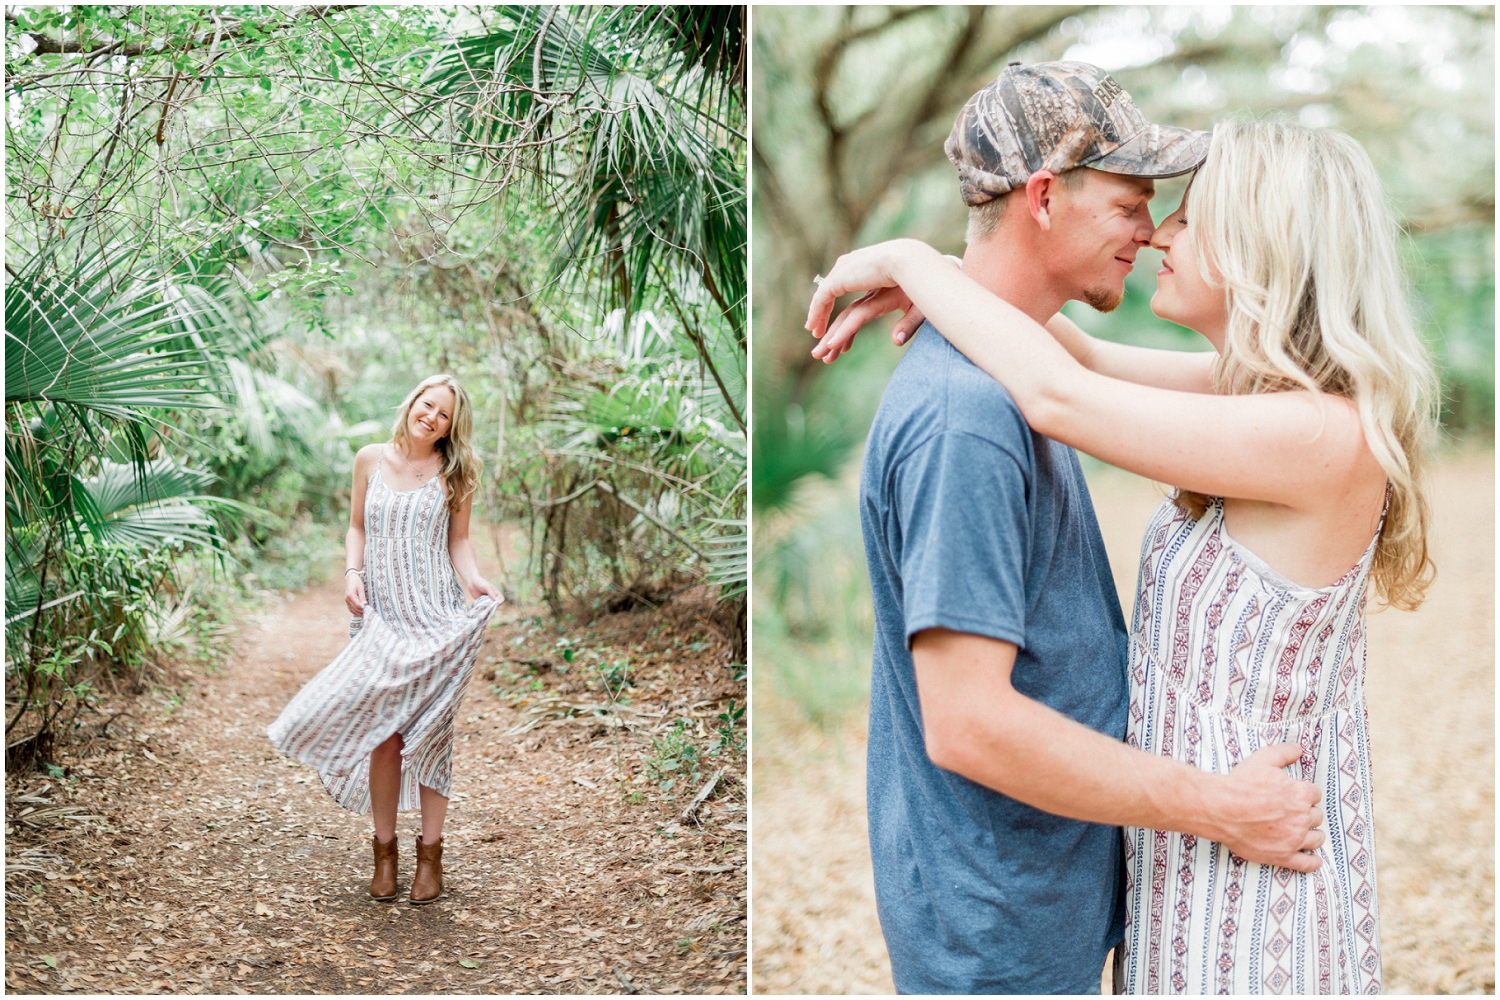 engagement session outfit ideas, casual engagement session outfit ideas